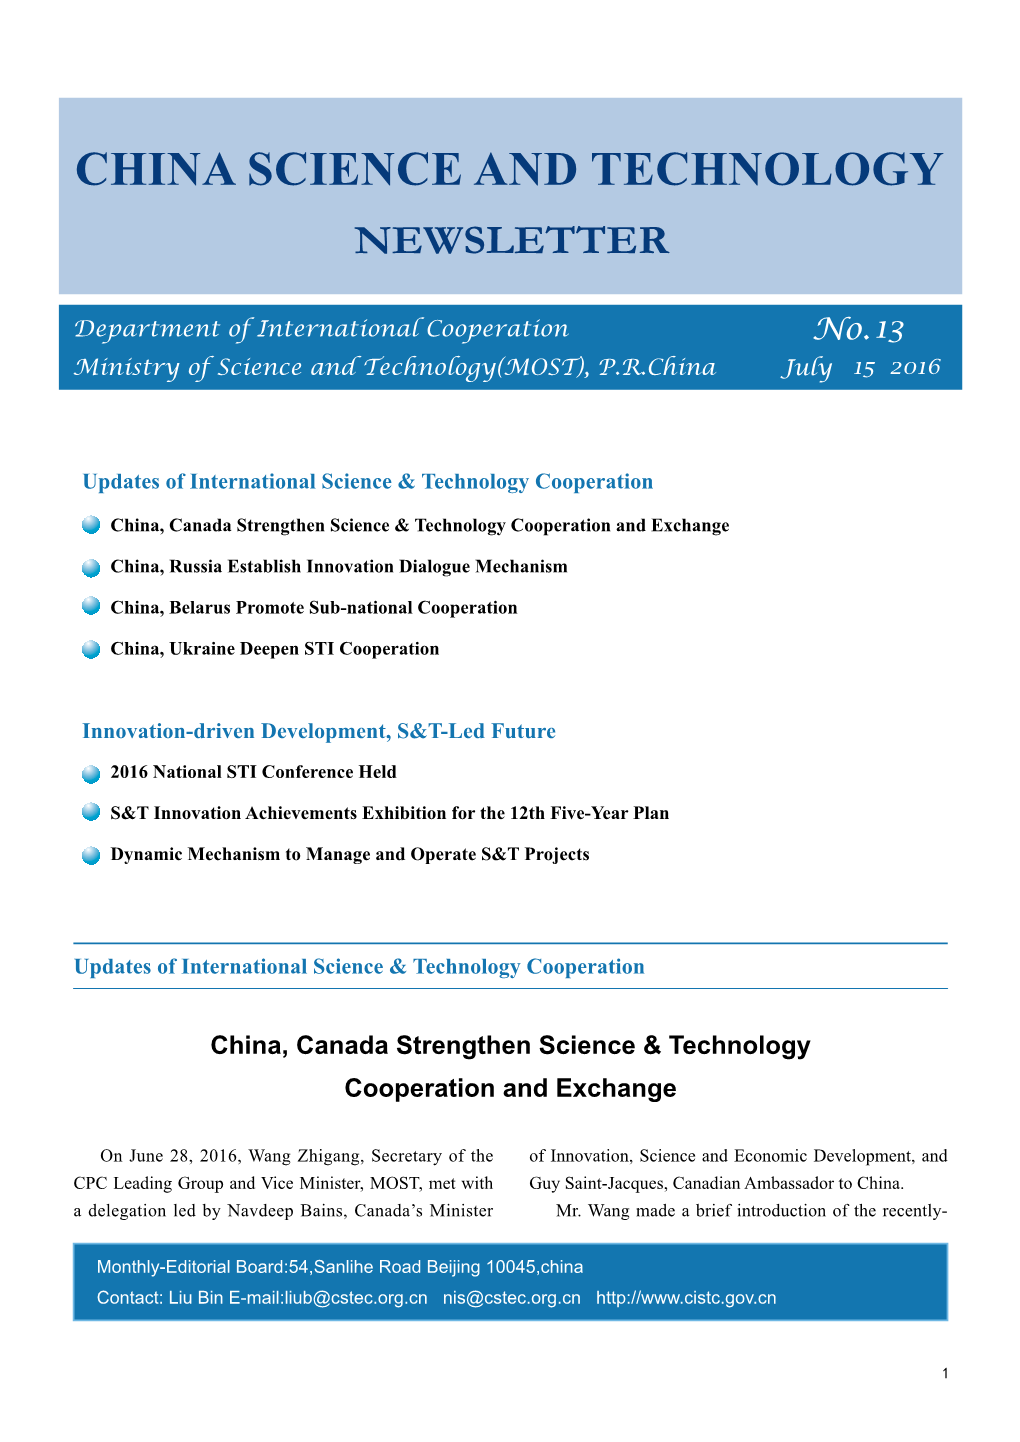 China Science and Technology Newsletter